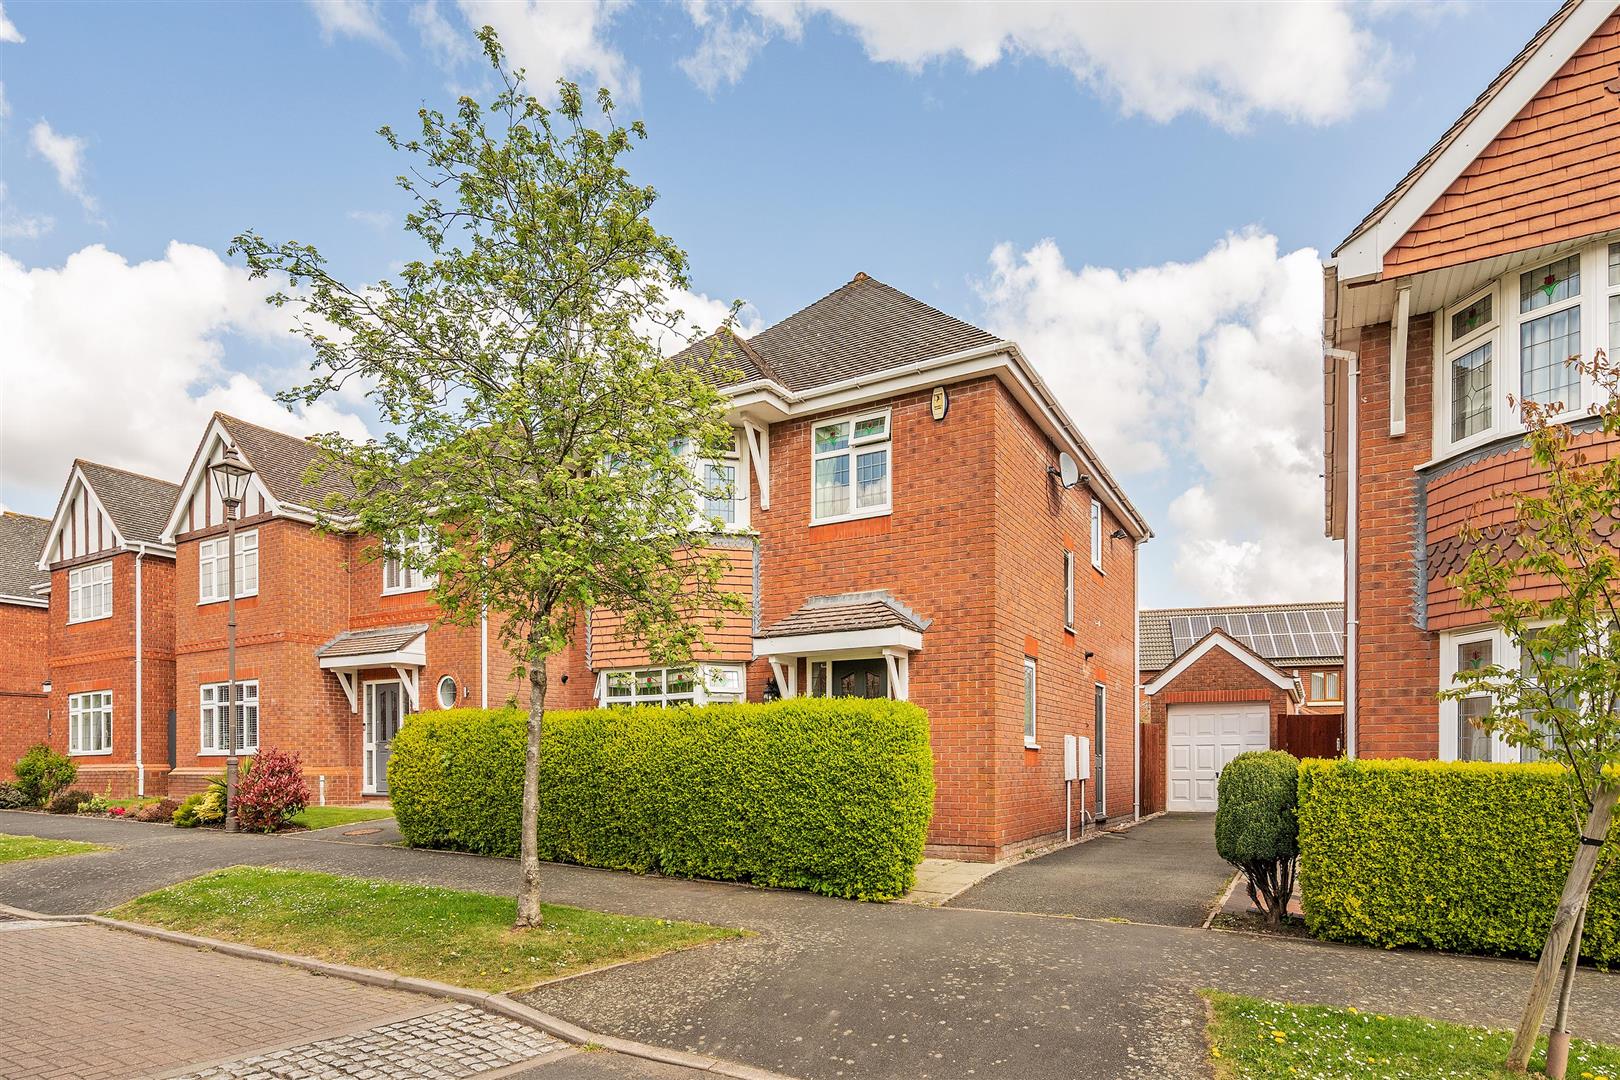 4 bed  for sale in Brixfield Way, Solihull, B90 